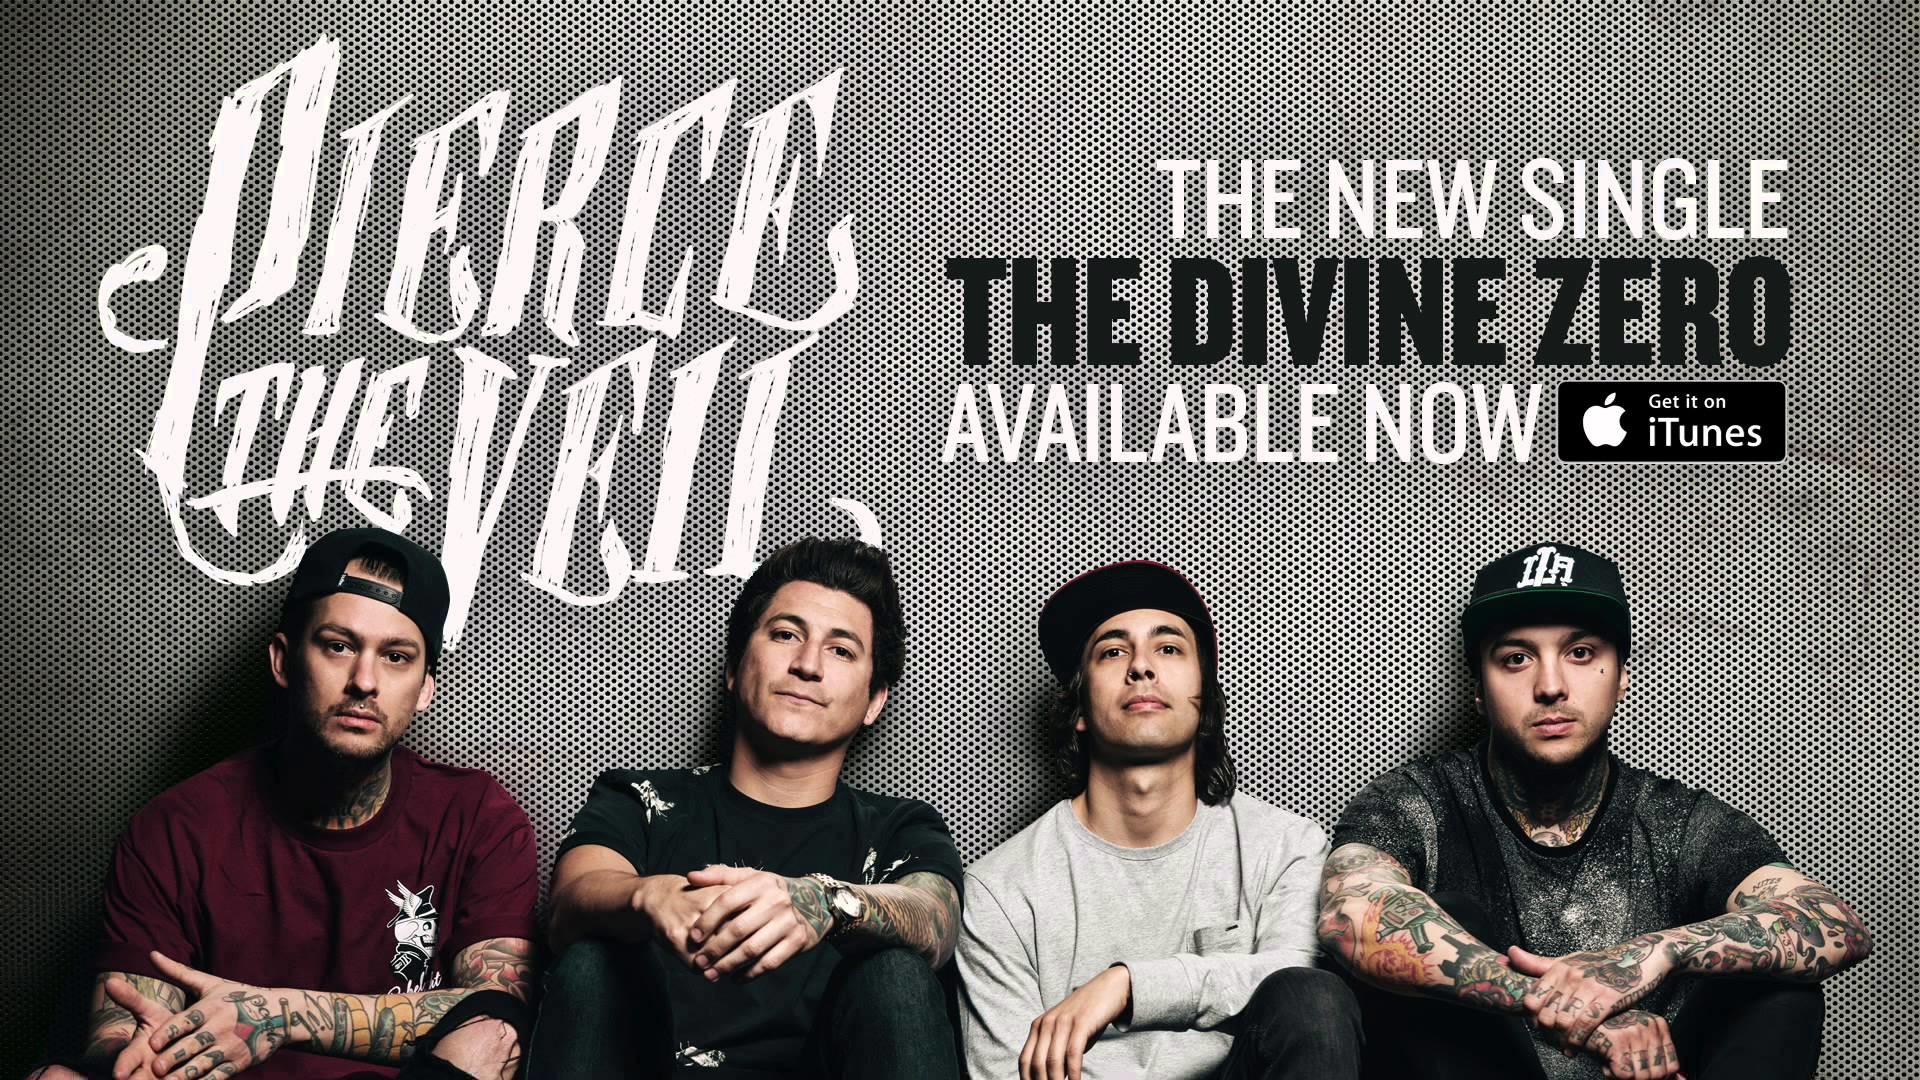 Pierce the Veil Wallpapers 75 pictures